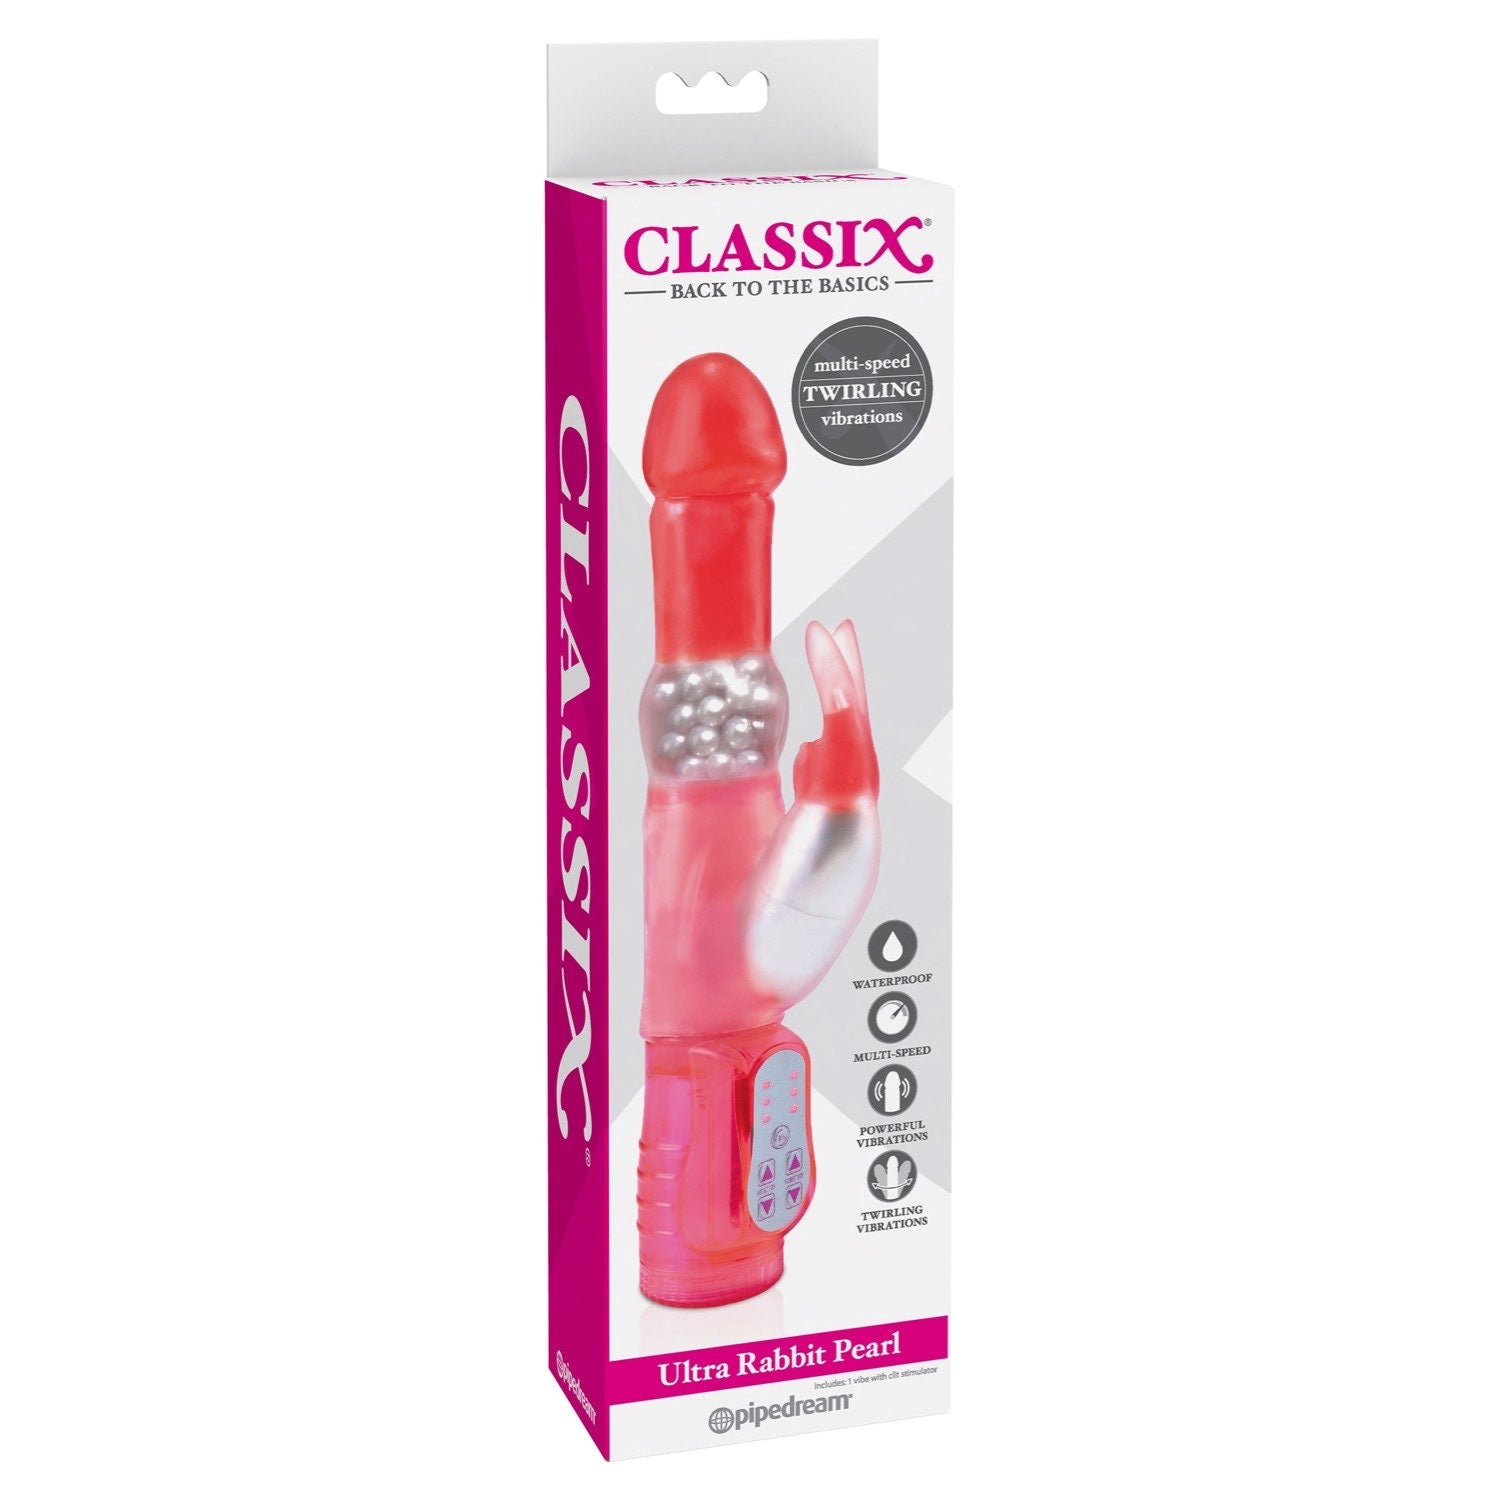 Classix Ultra Rabbit Pearl - Pink 10&quot; Pearl Vibrator with Rabbit Clit Stimulator by Pipedream